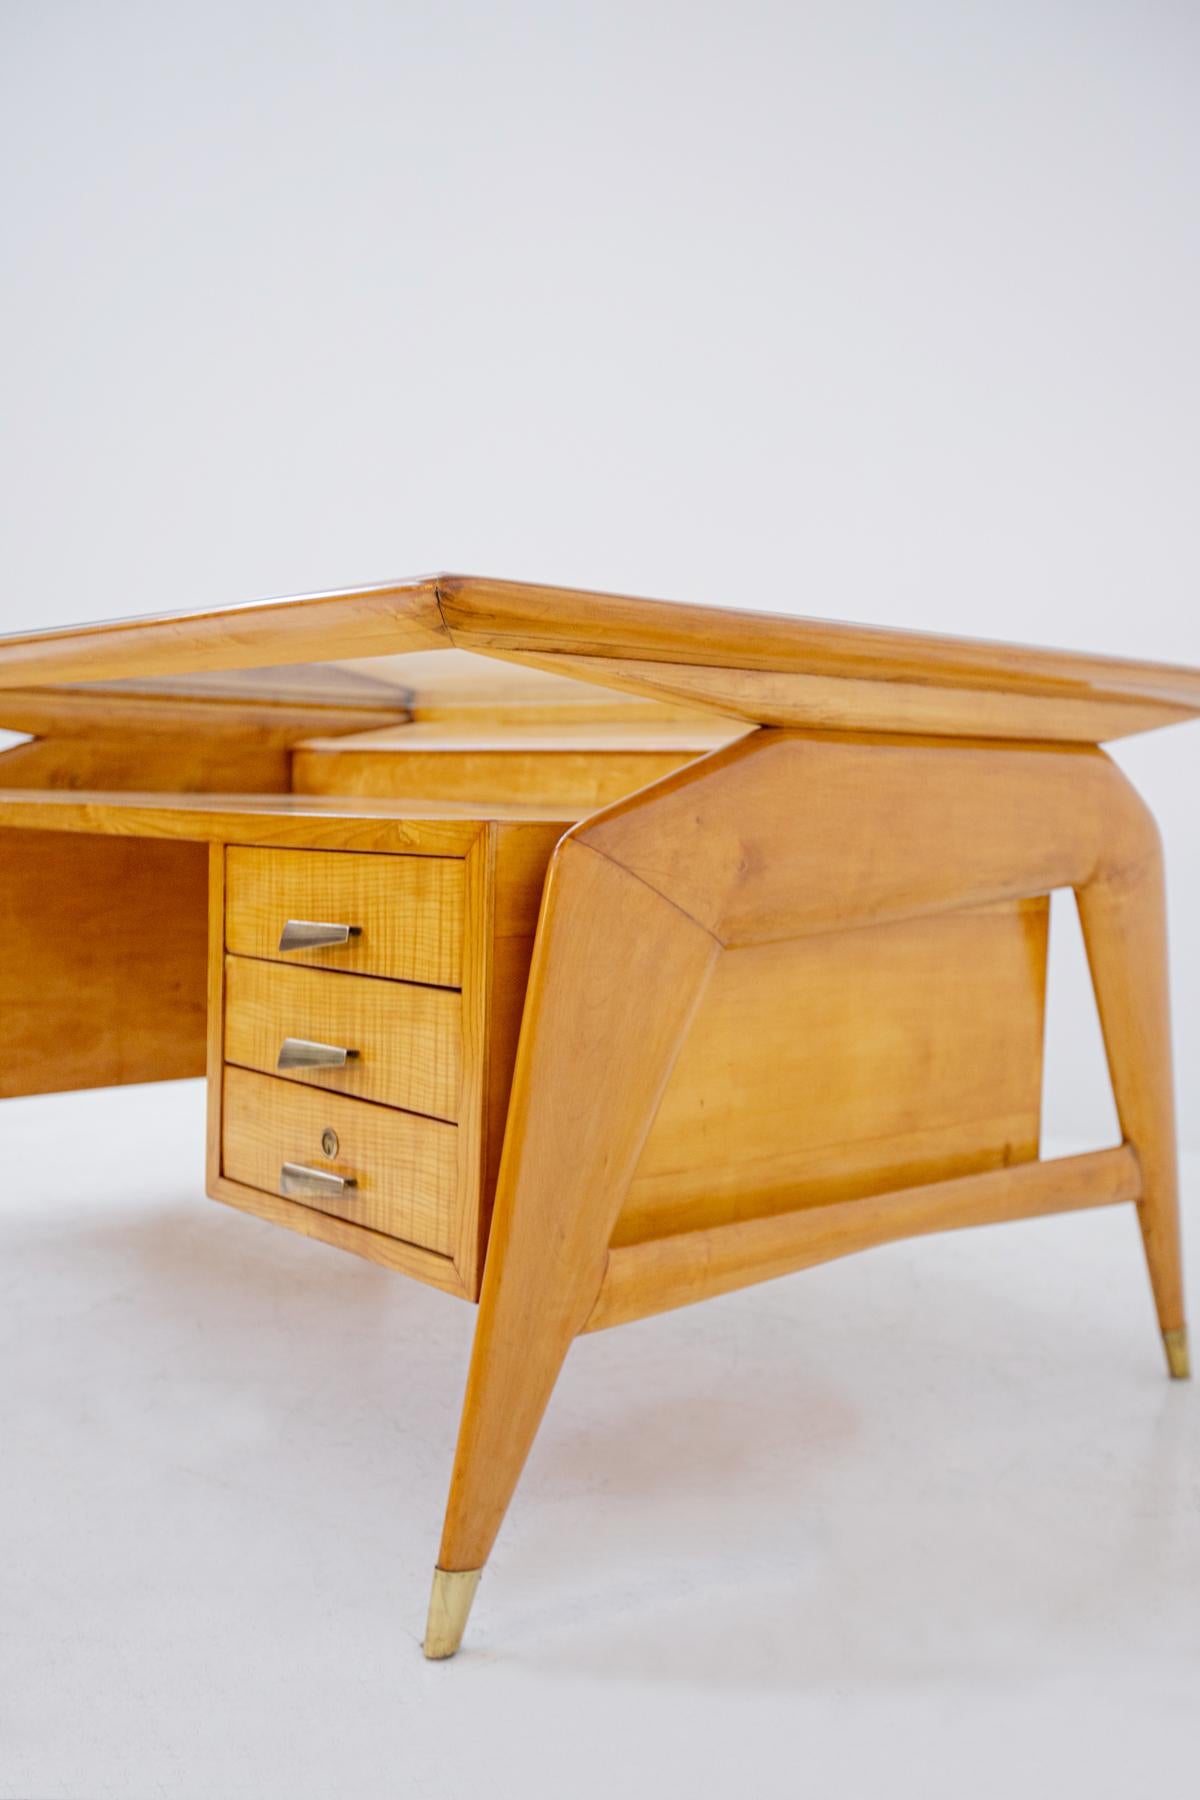 Carlo de Carli Important Desk in Wood Glass and Brass, 1950s Published 8